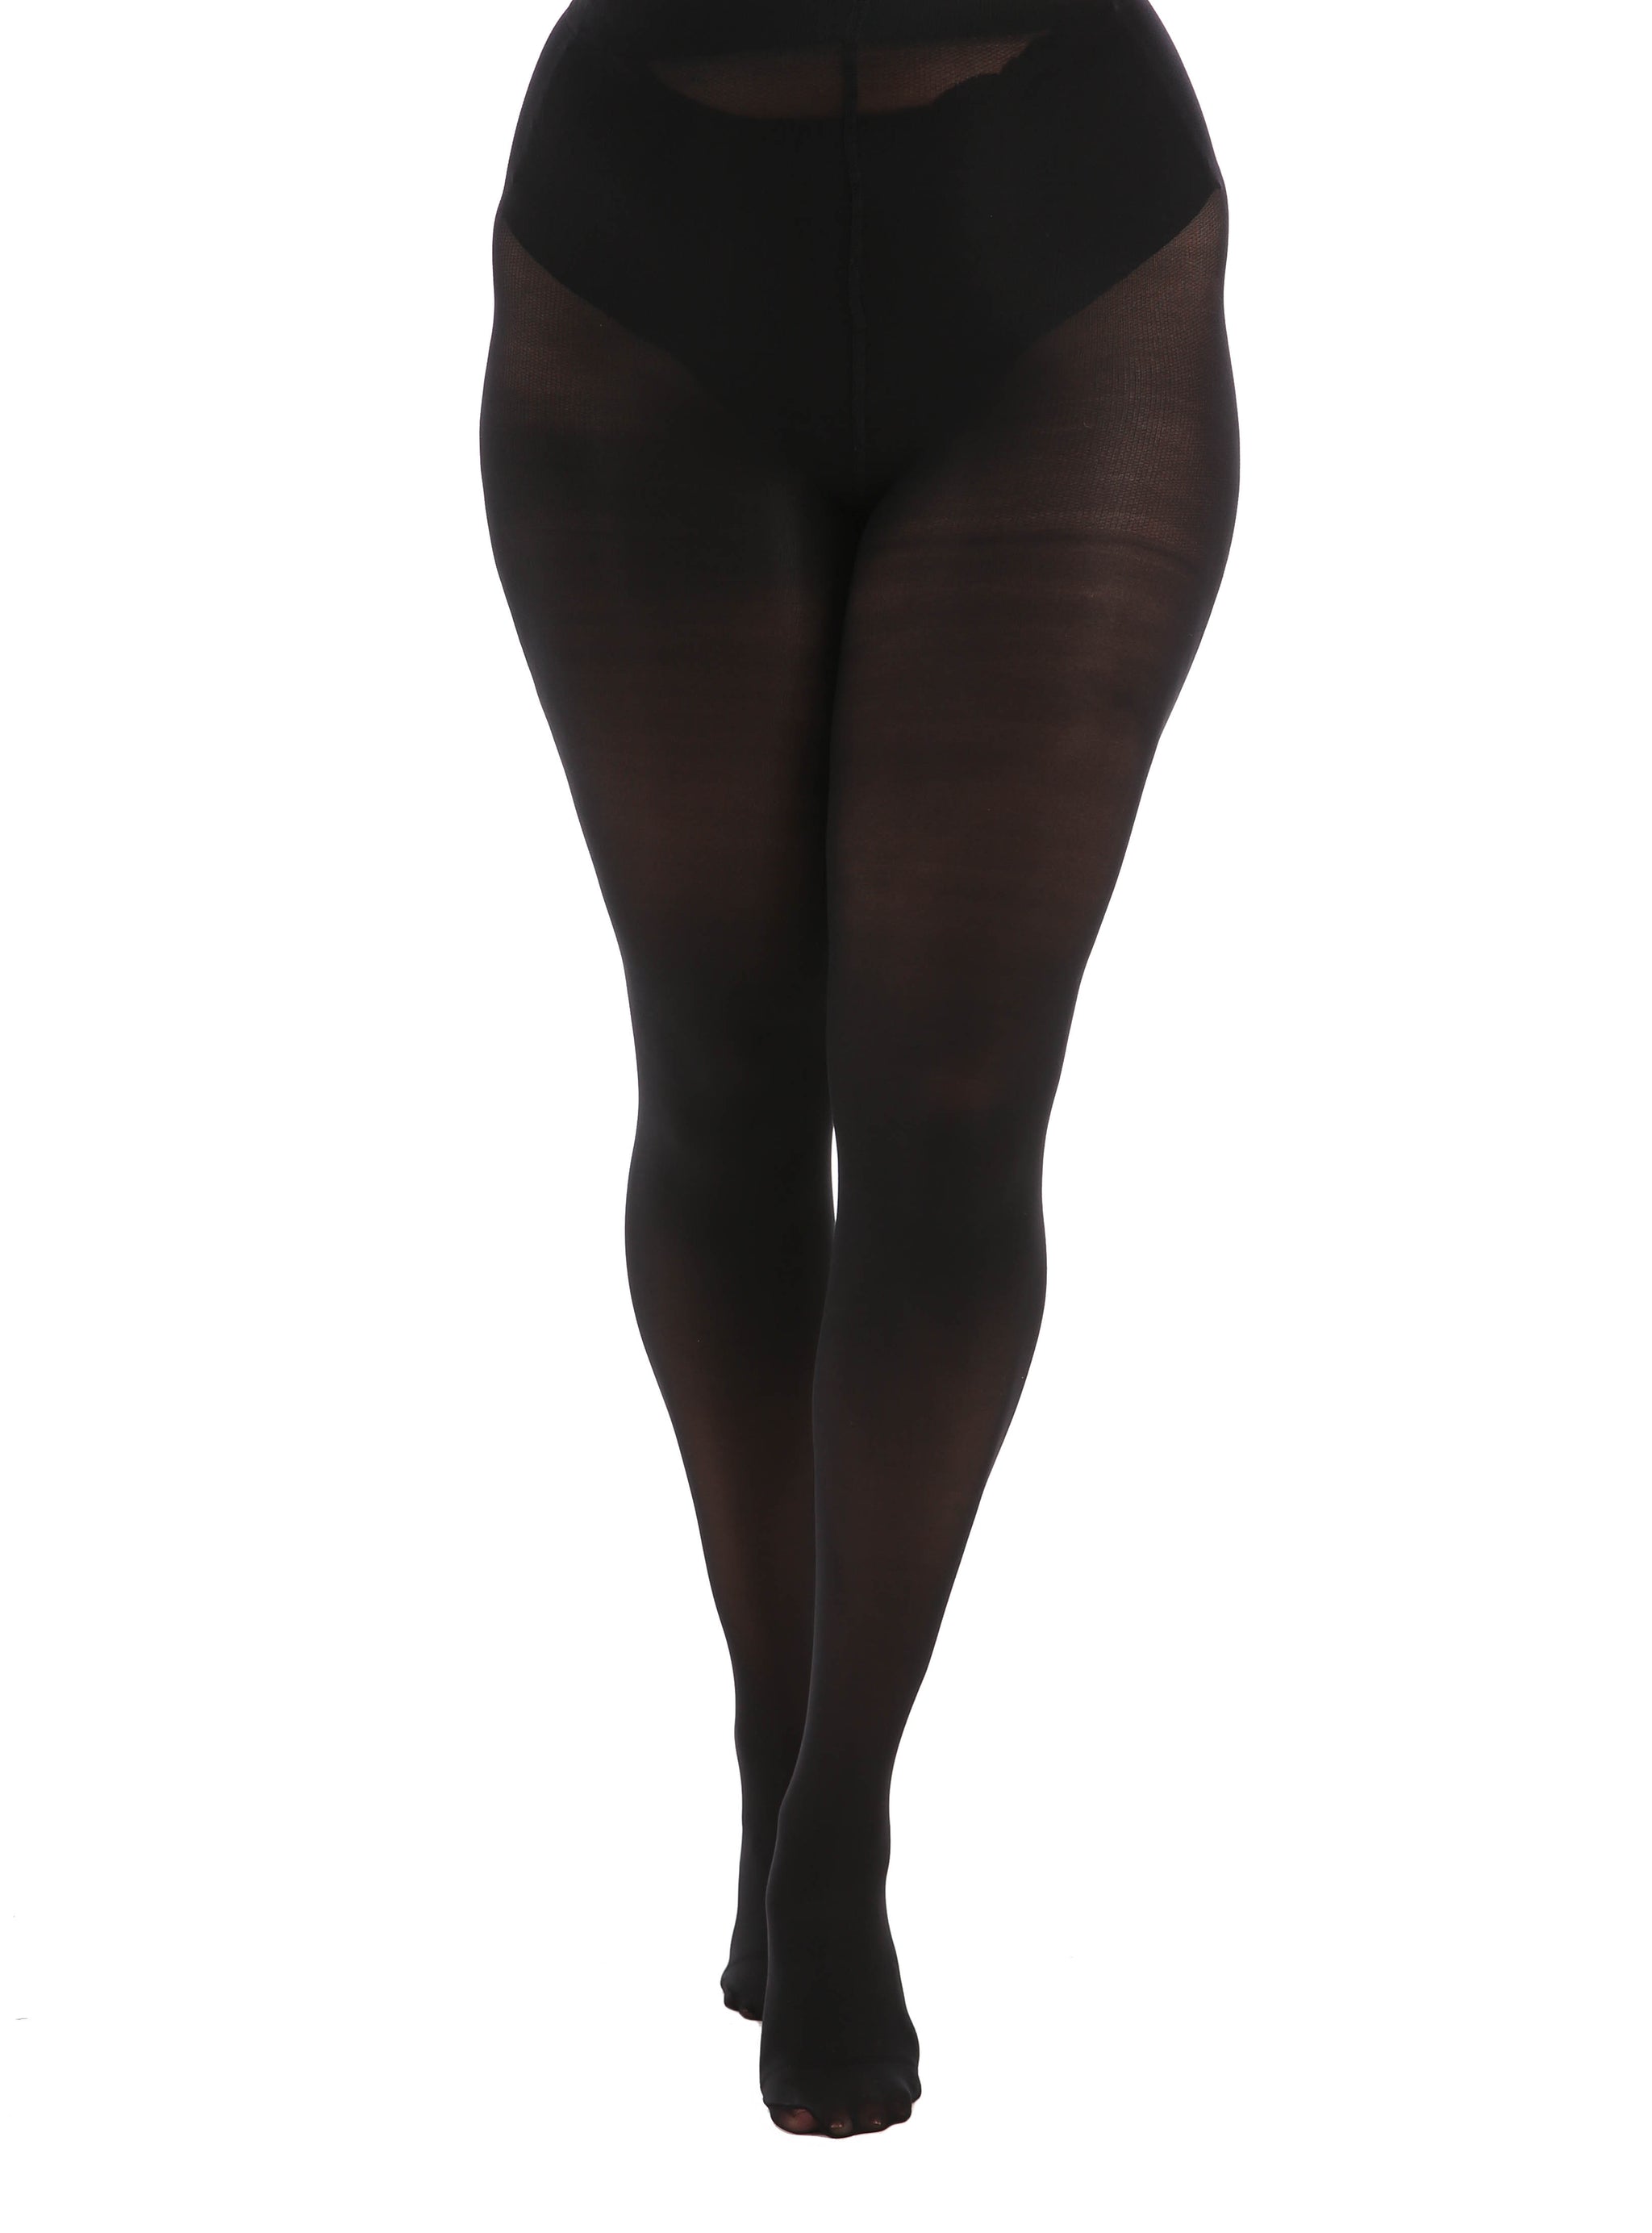 Shop Quality Plus Size Tights and Hosiery Online Australia